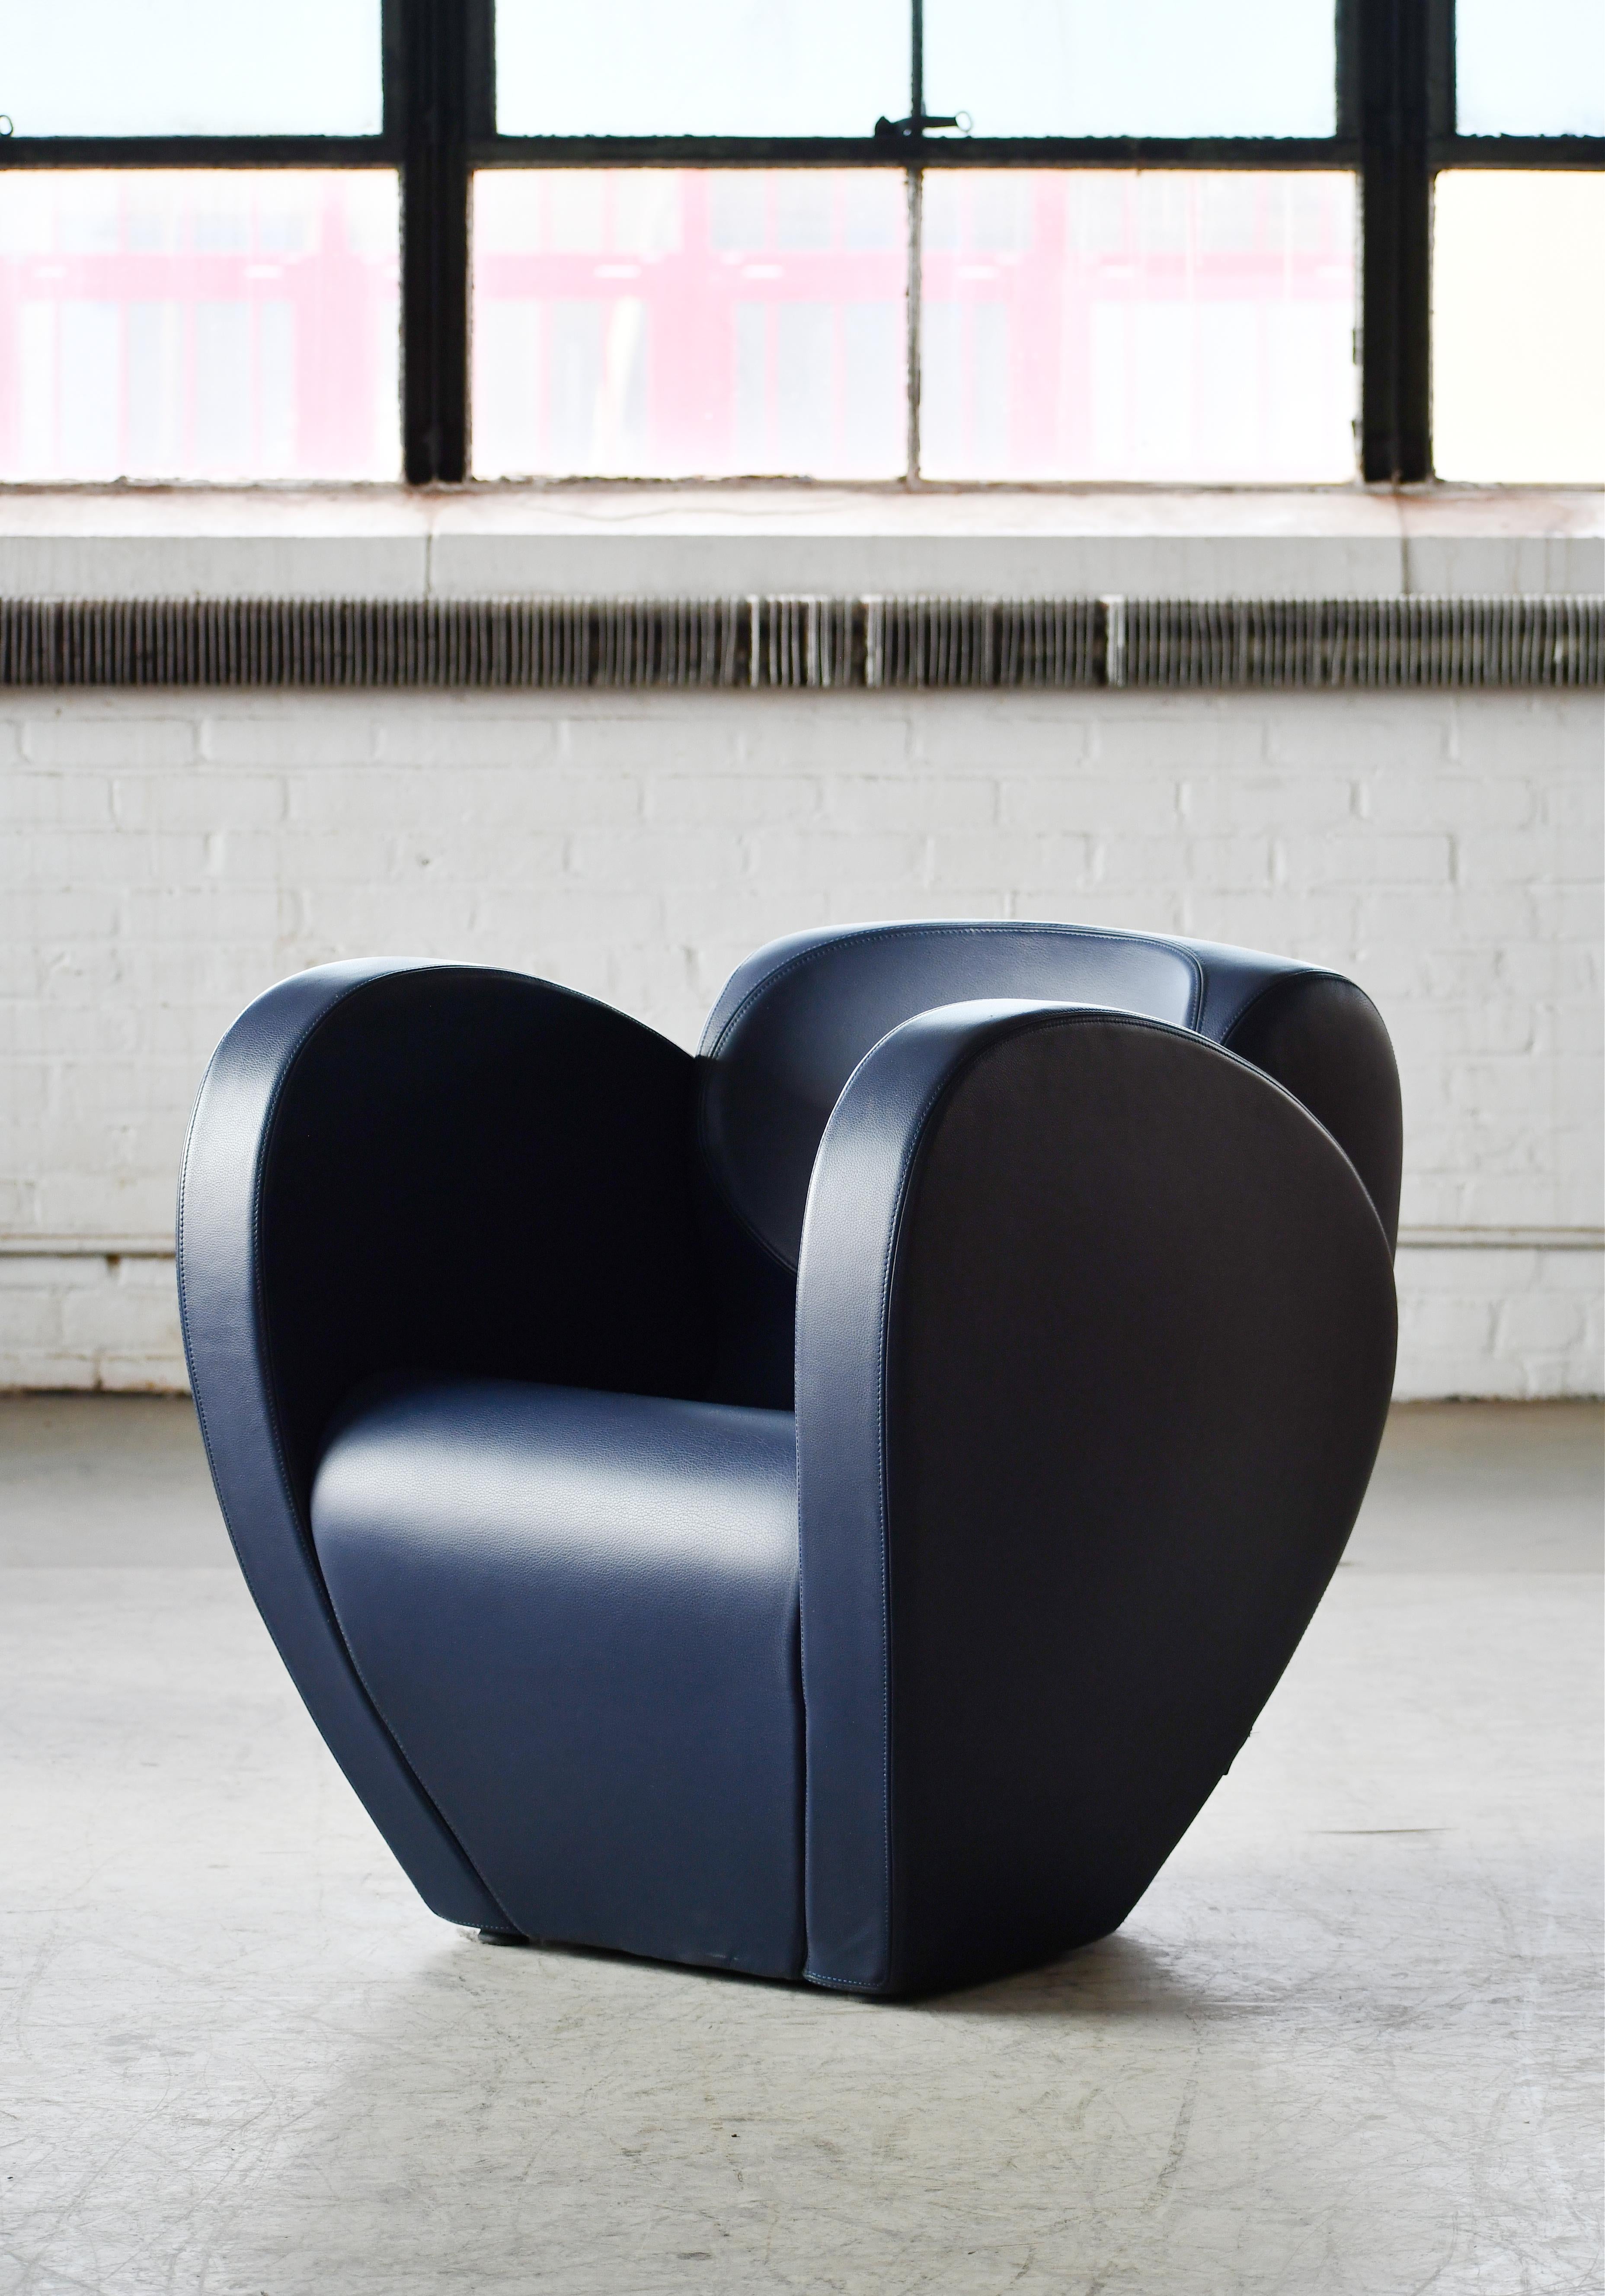 This amazing armchair from the Spring collection was designed by the famous Ron Arad as Model 10 in 1991 for Moroso of Italy. Frame upholstered with polyurethane foam covered in a soft blue leather. Extraordinary lines from all angles and very